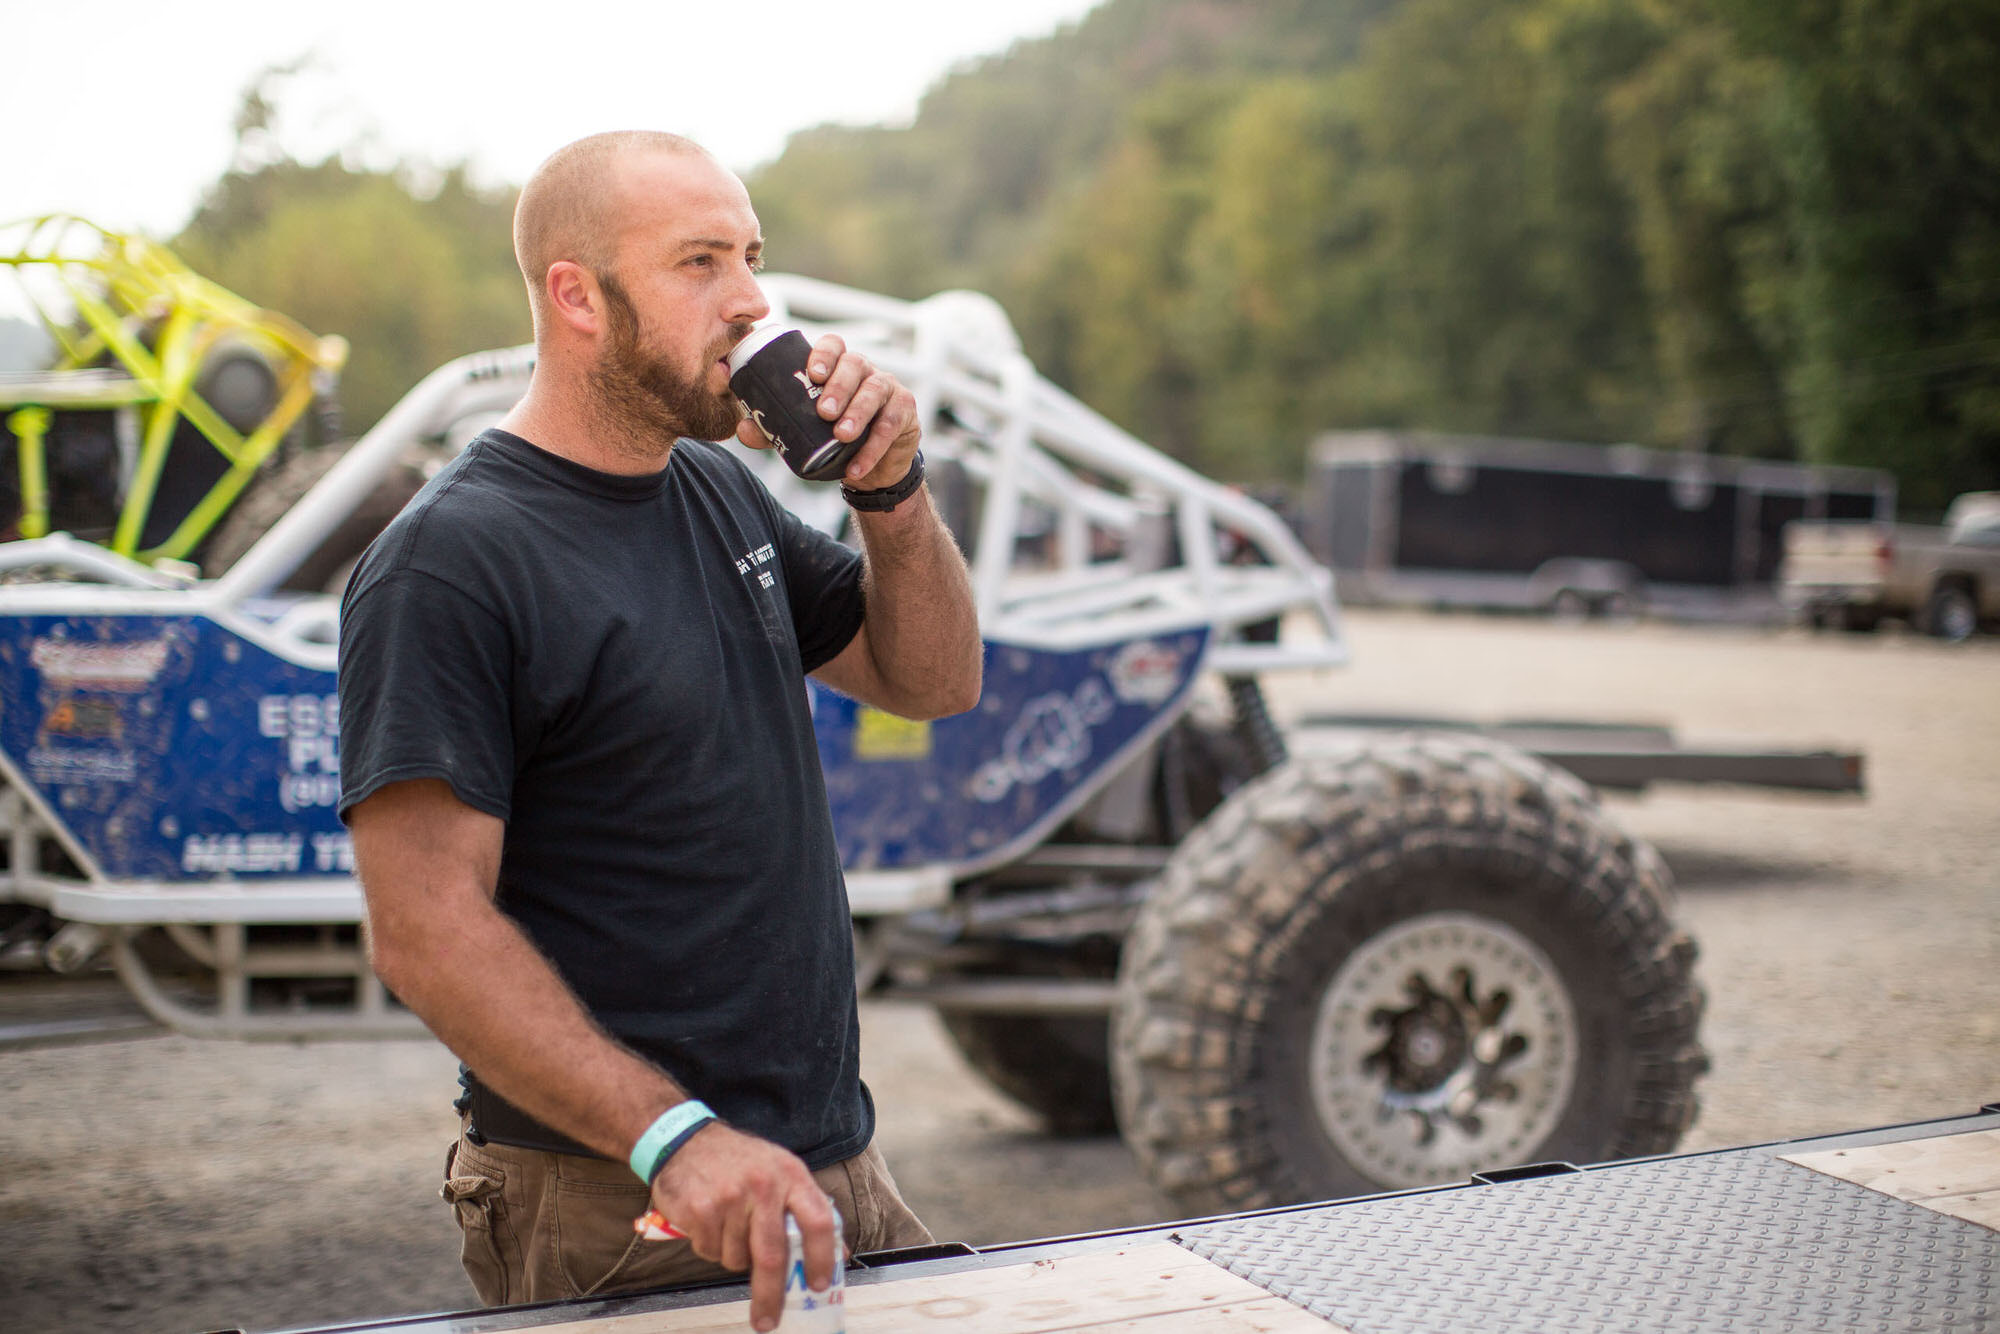 Fresh Beer at Rock Bouncing event in Arkansas, photographed for Car and Driver Magazine